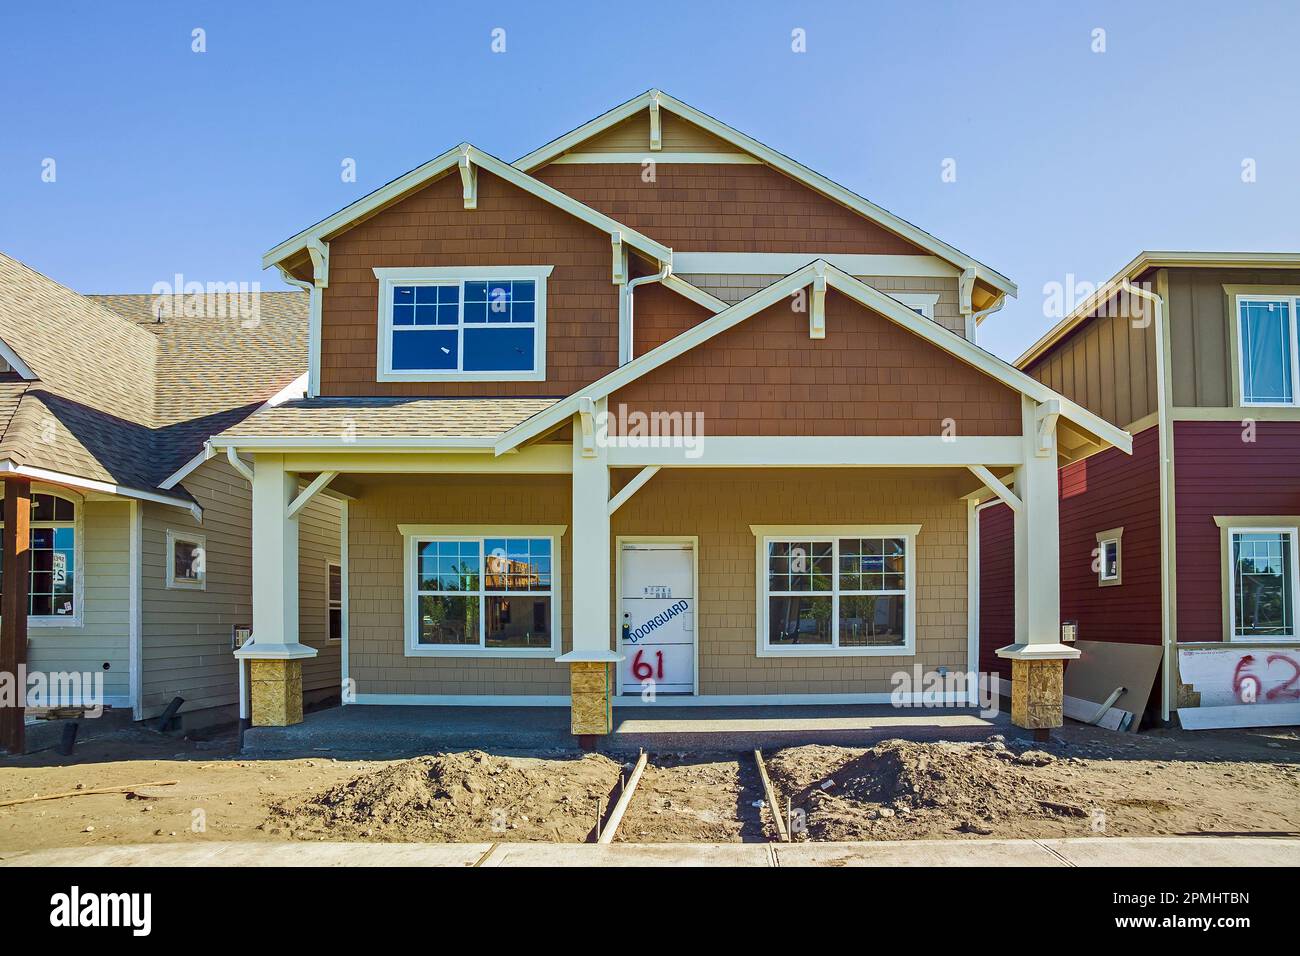 Exterior of a moderately priced house or home under construction. Stock Photo